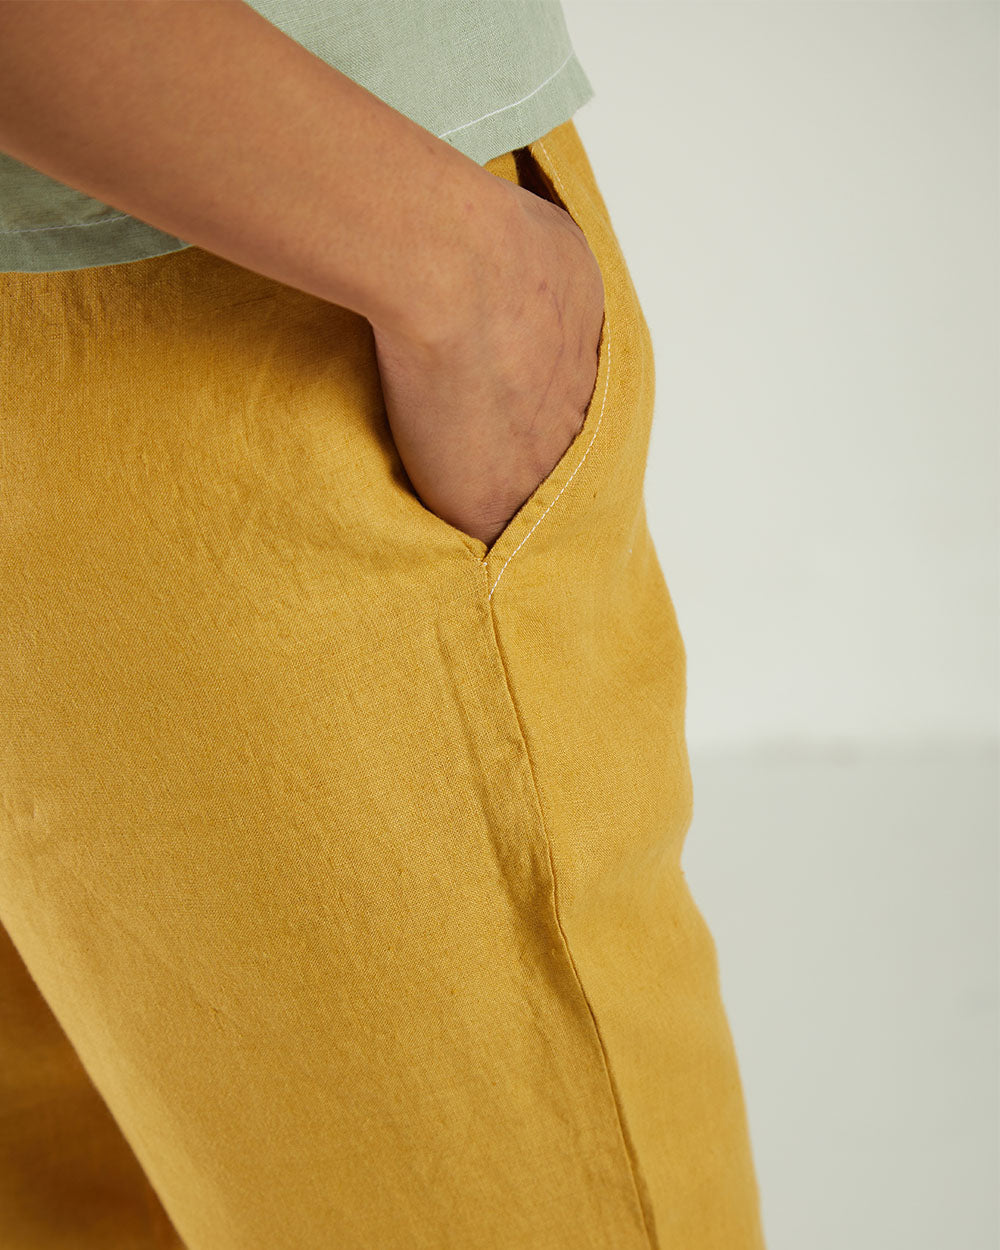 Yellow High-Waist Pants at Kamakhyaa by Reistor. This item is Bemberg, Casual Wear, Fitted At Waist, Hemp, Natural, Pants, Solids, Womenswear, Yellow